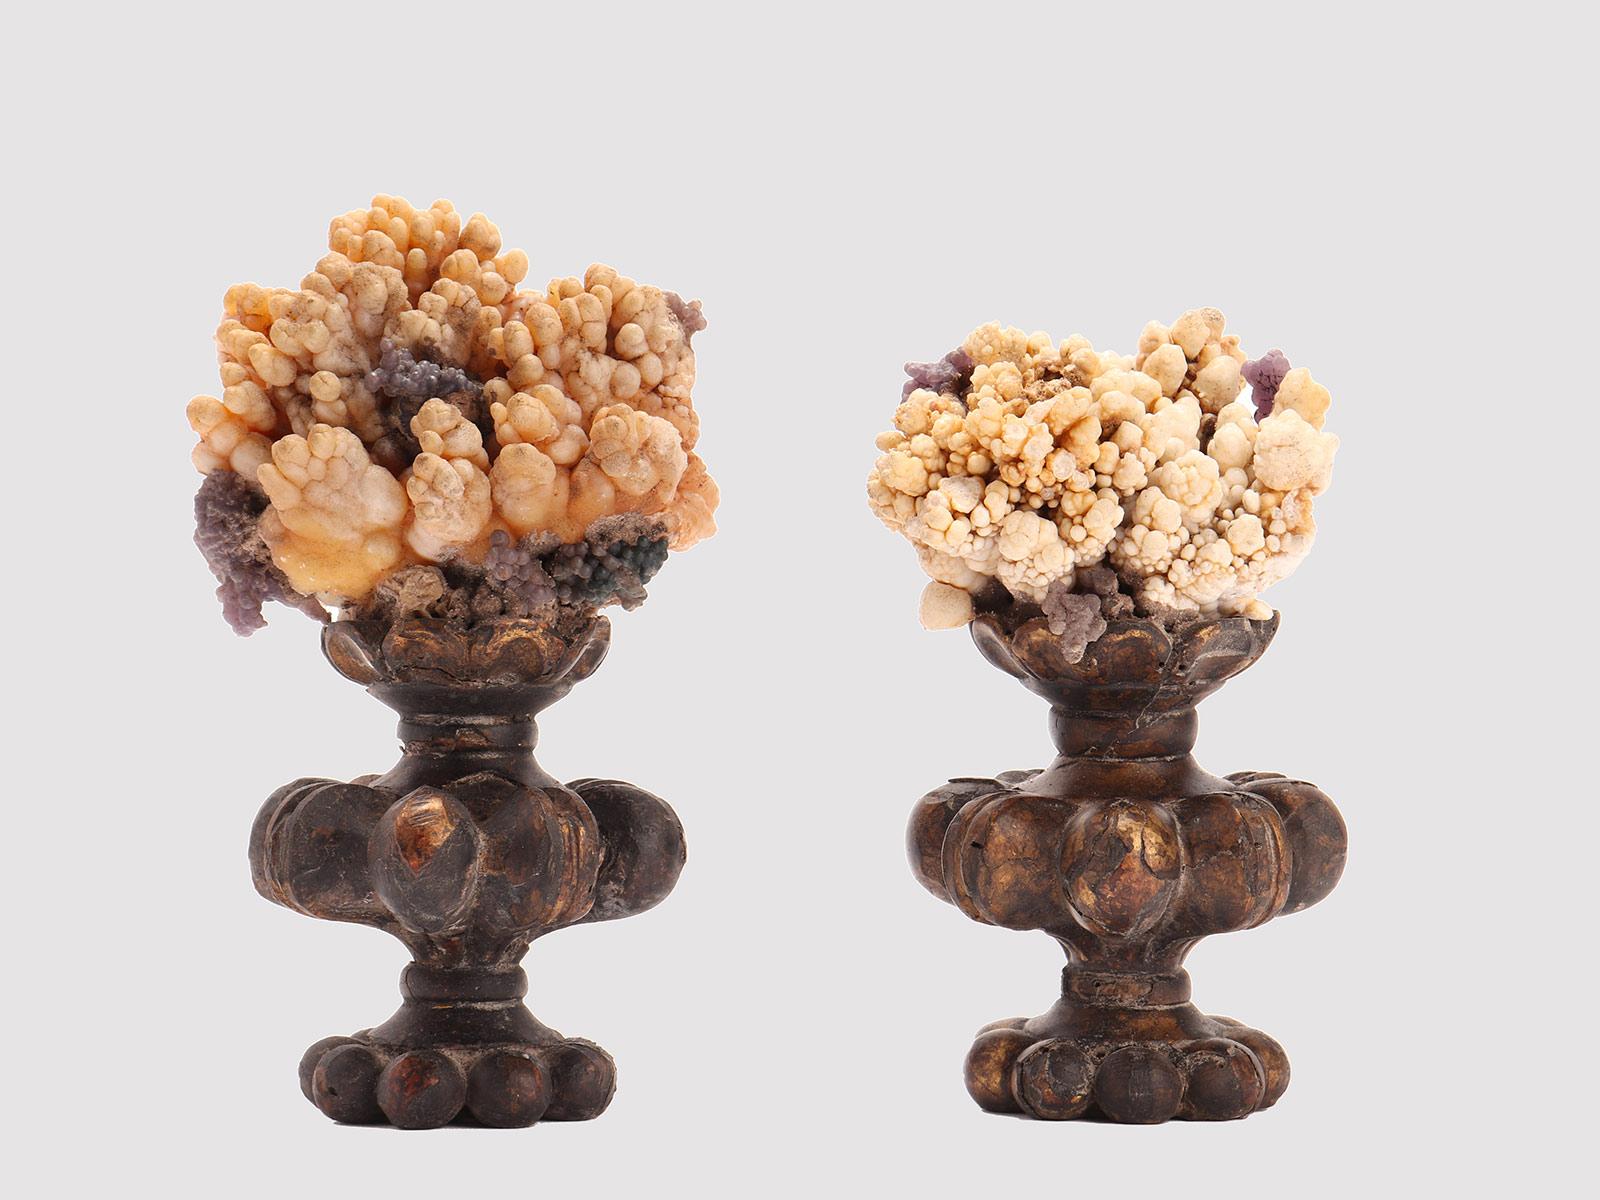 A Pair of Naturalia mineral specimen: Calcite flowers and Pyromorphite crystals, mounted over a carved wooden base, vase shape, gold gilded. Italy around 1880.